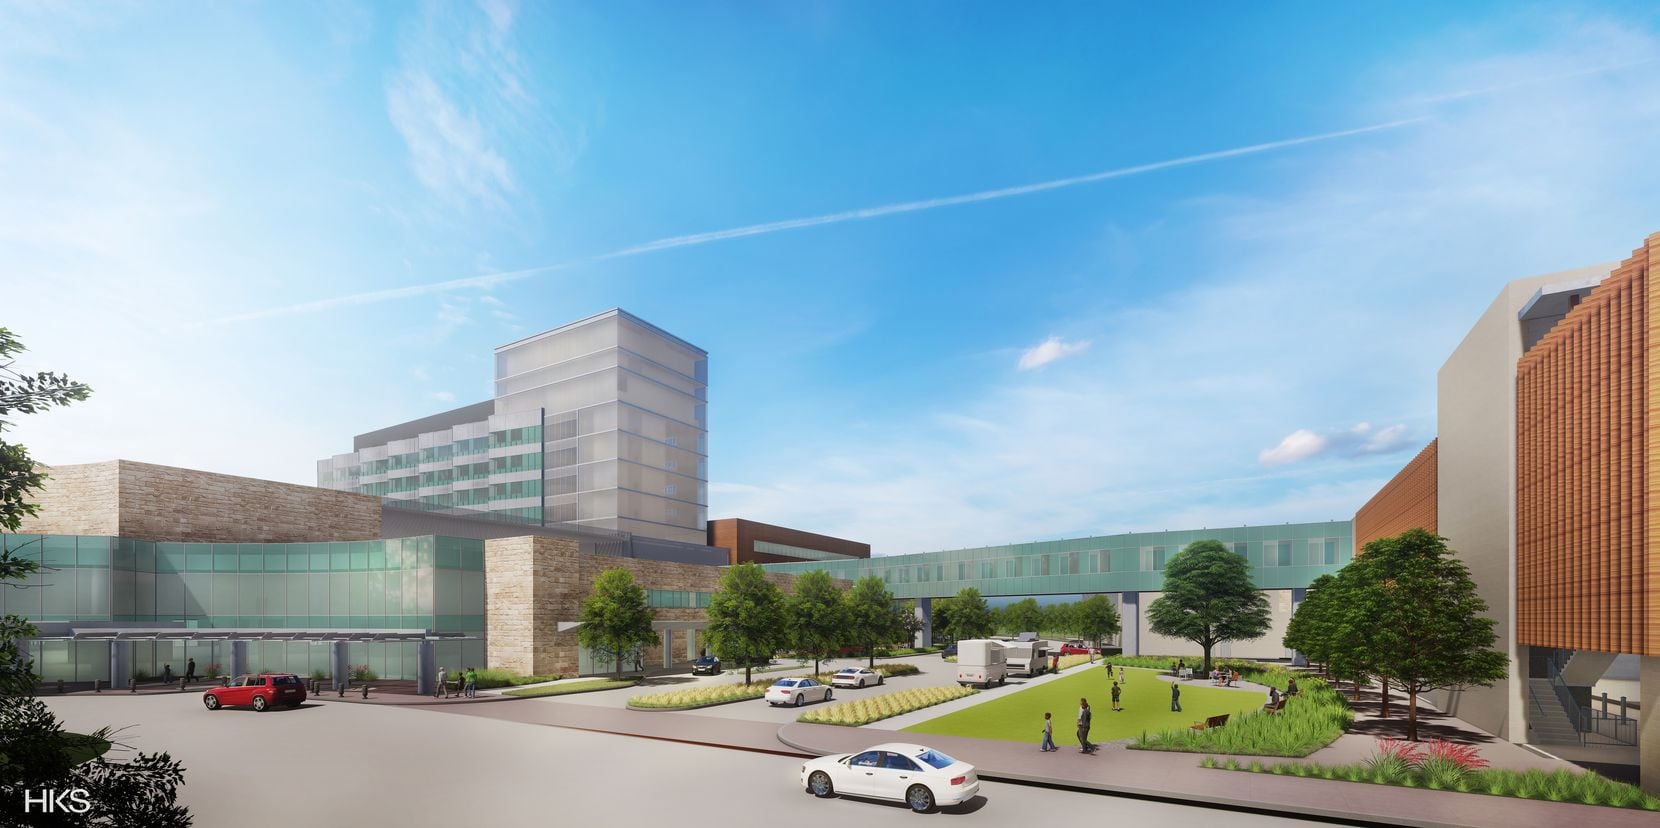 The Children's Medical Center Plano expansion will increase the total number of available beds from 72 to 212.